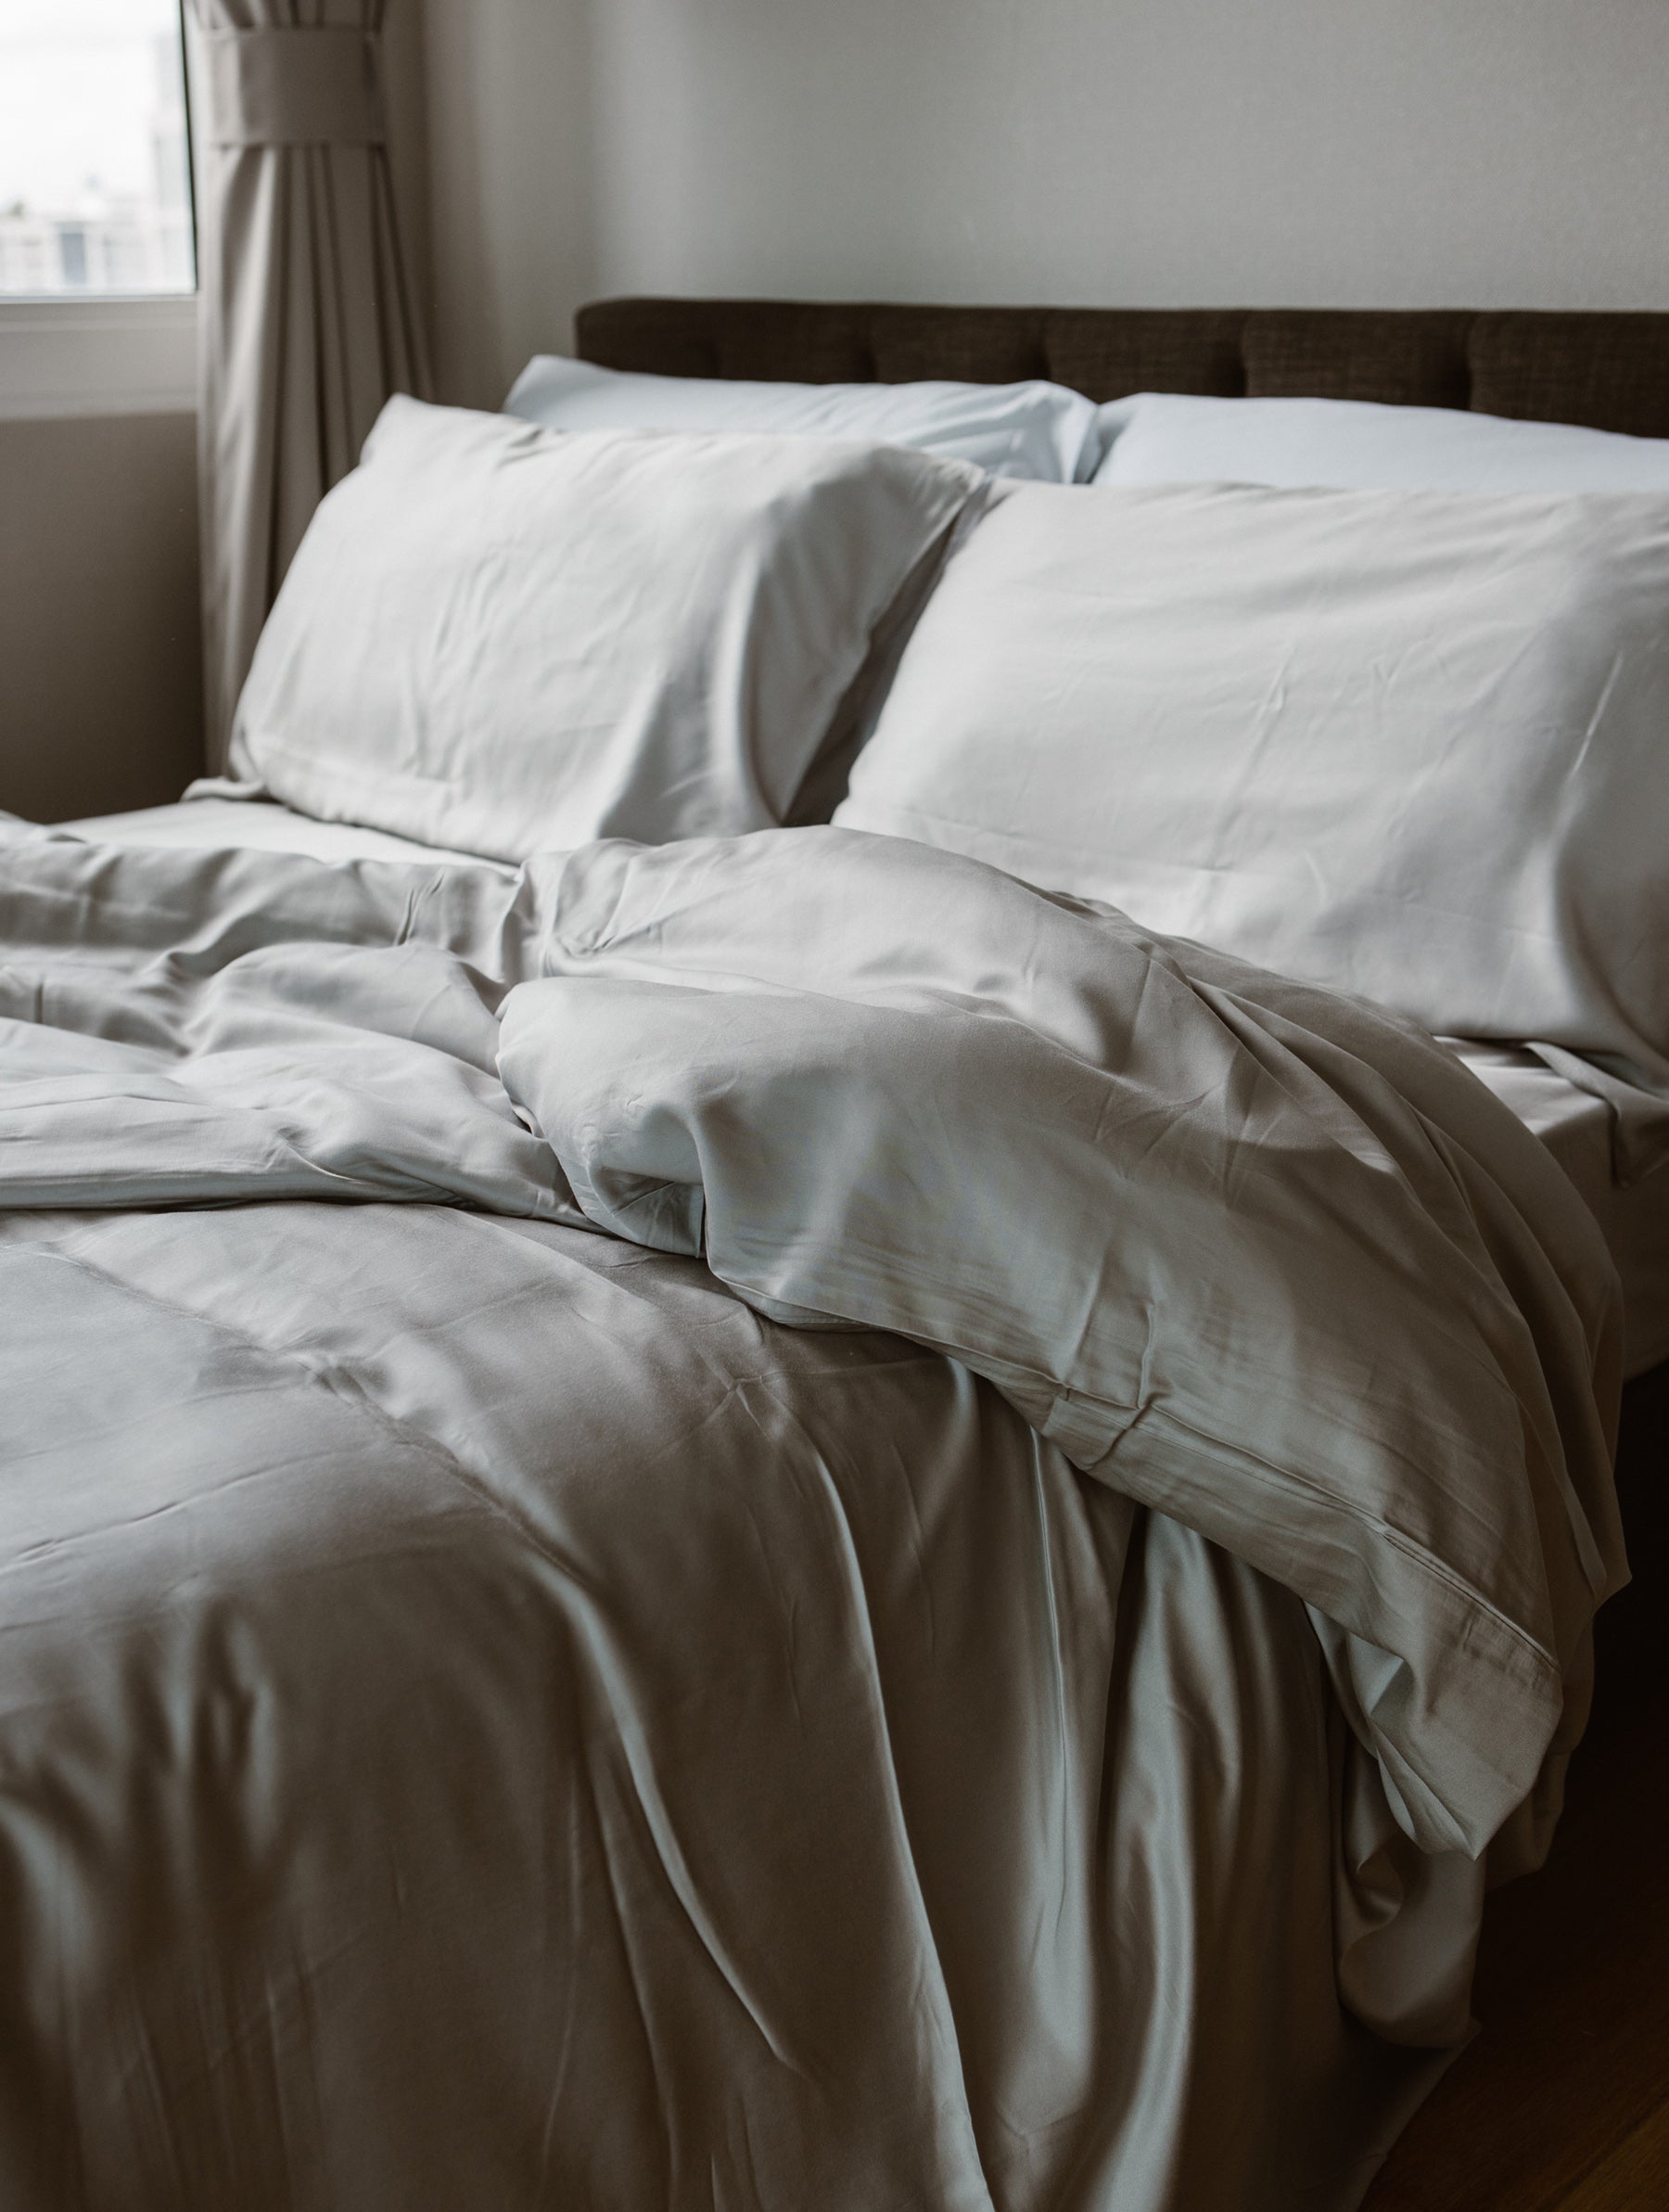 How to Prime Your Bedroom for a Good Night's Sleep